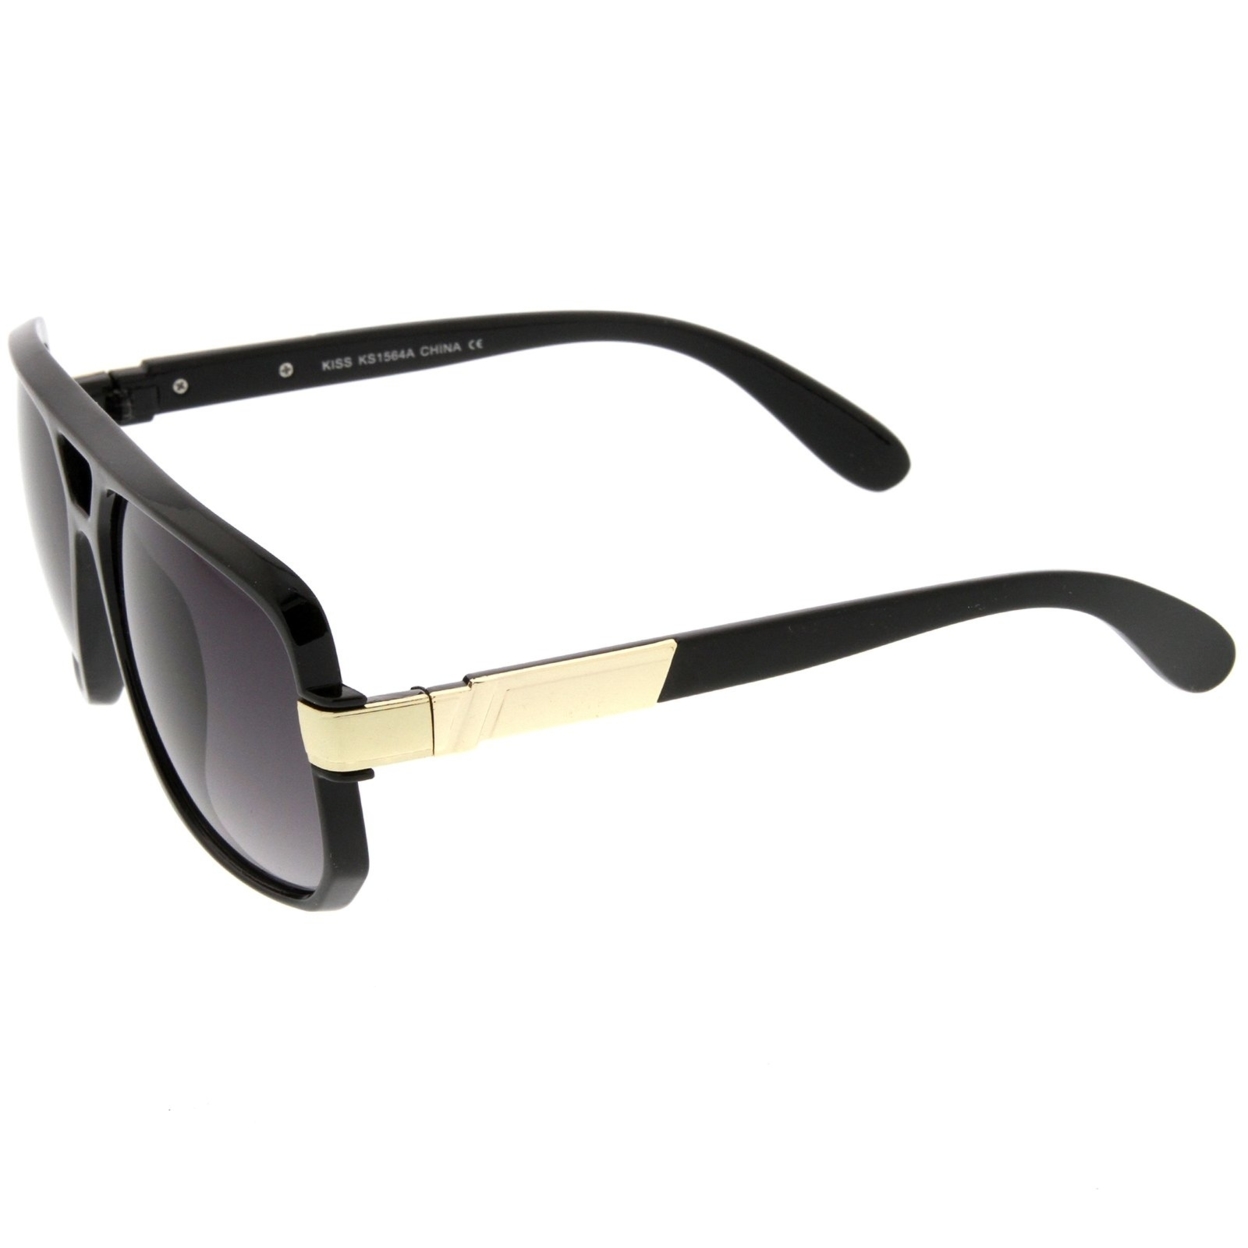 Classic Flat Top Metal Accented Temples Square Aviator Glasses 56mm - Matte Black-Gold / Smoke